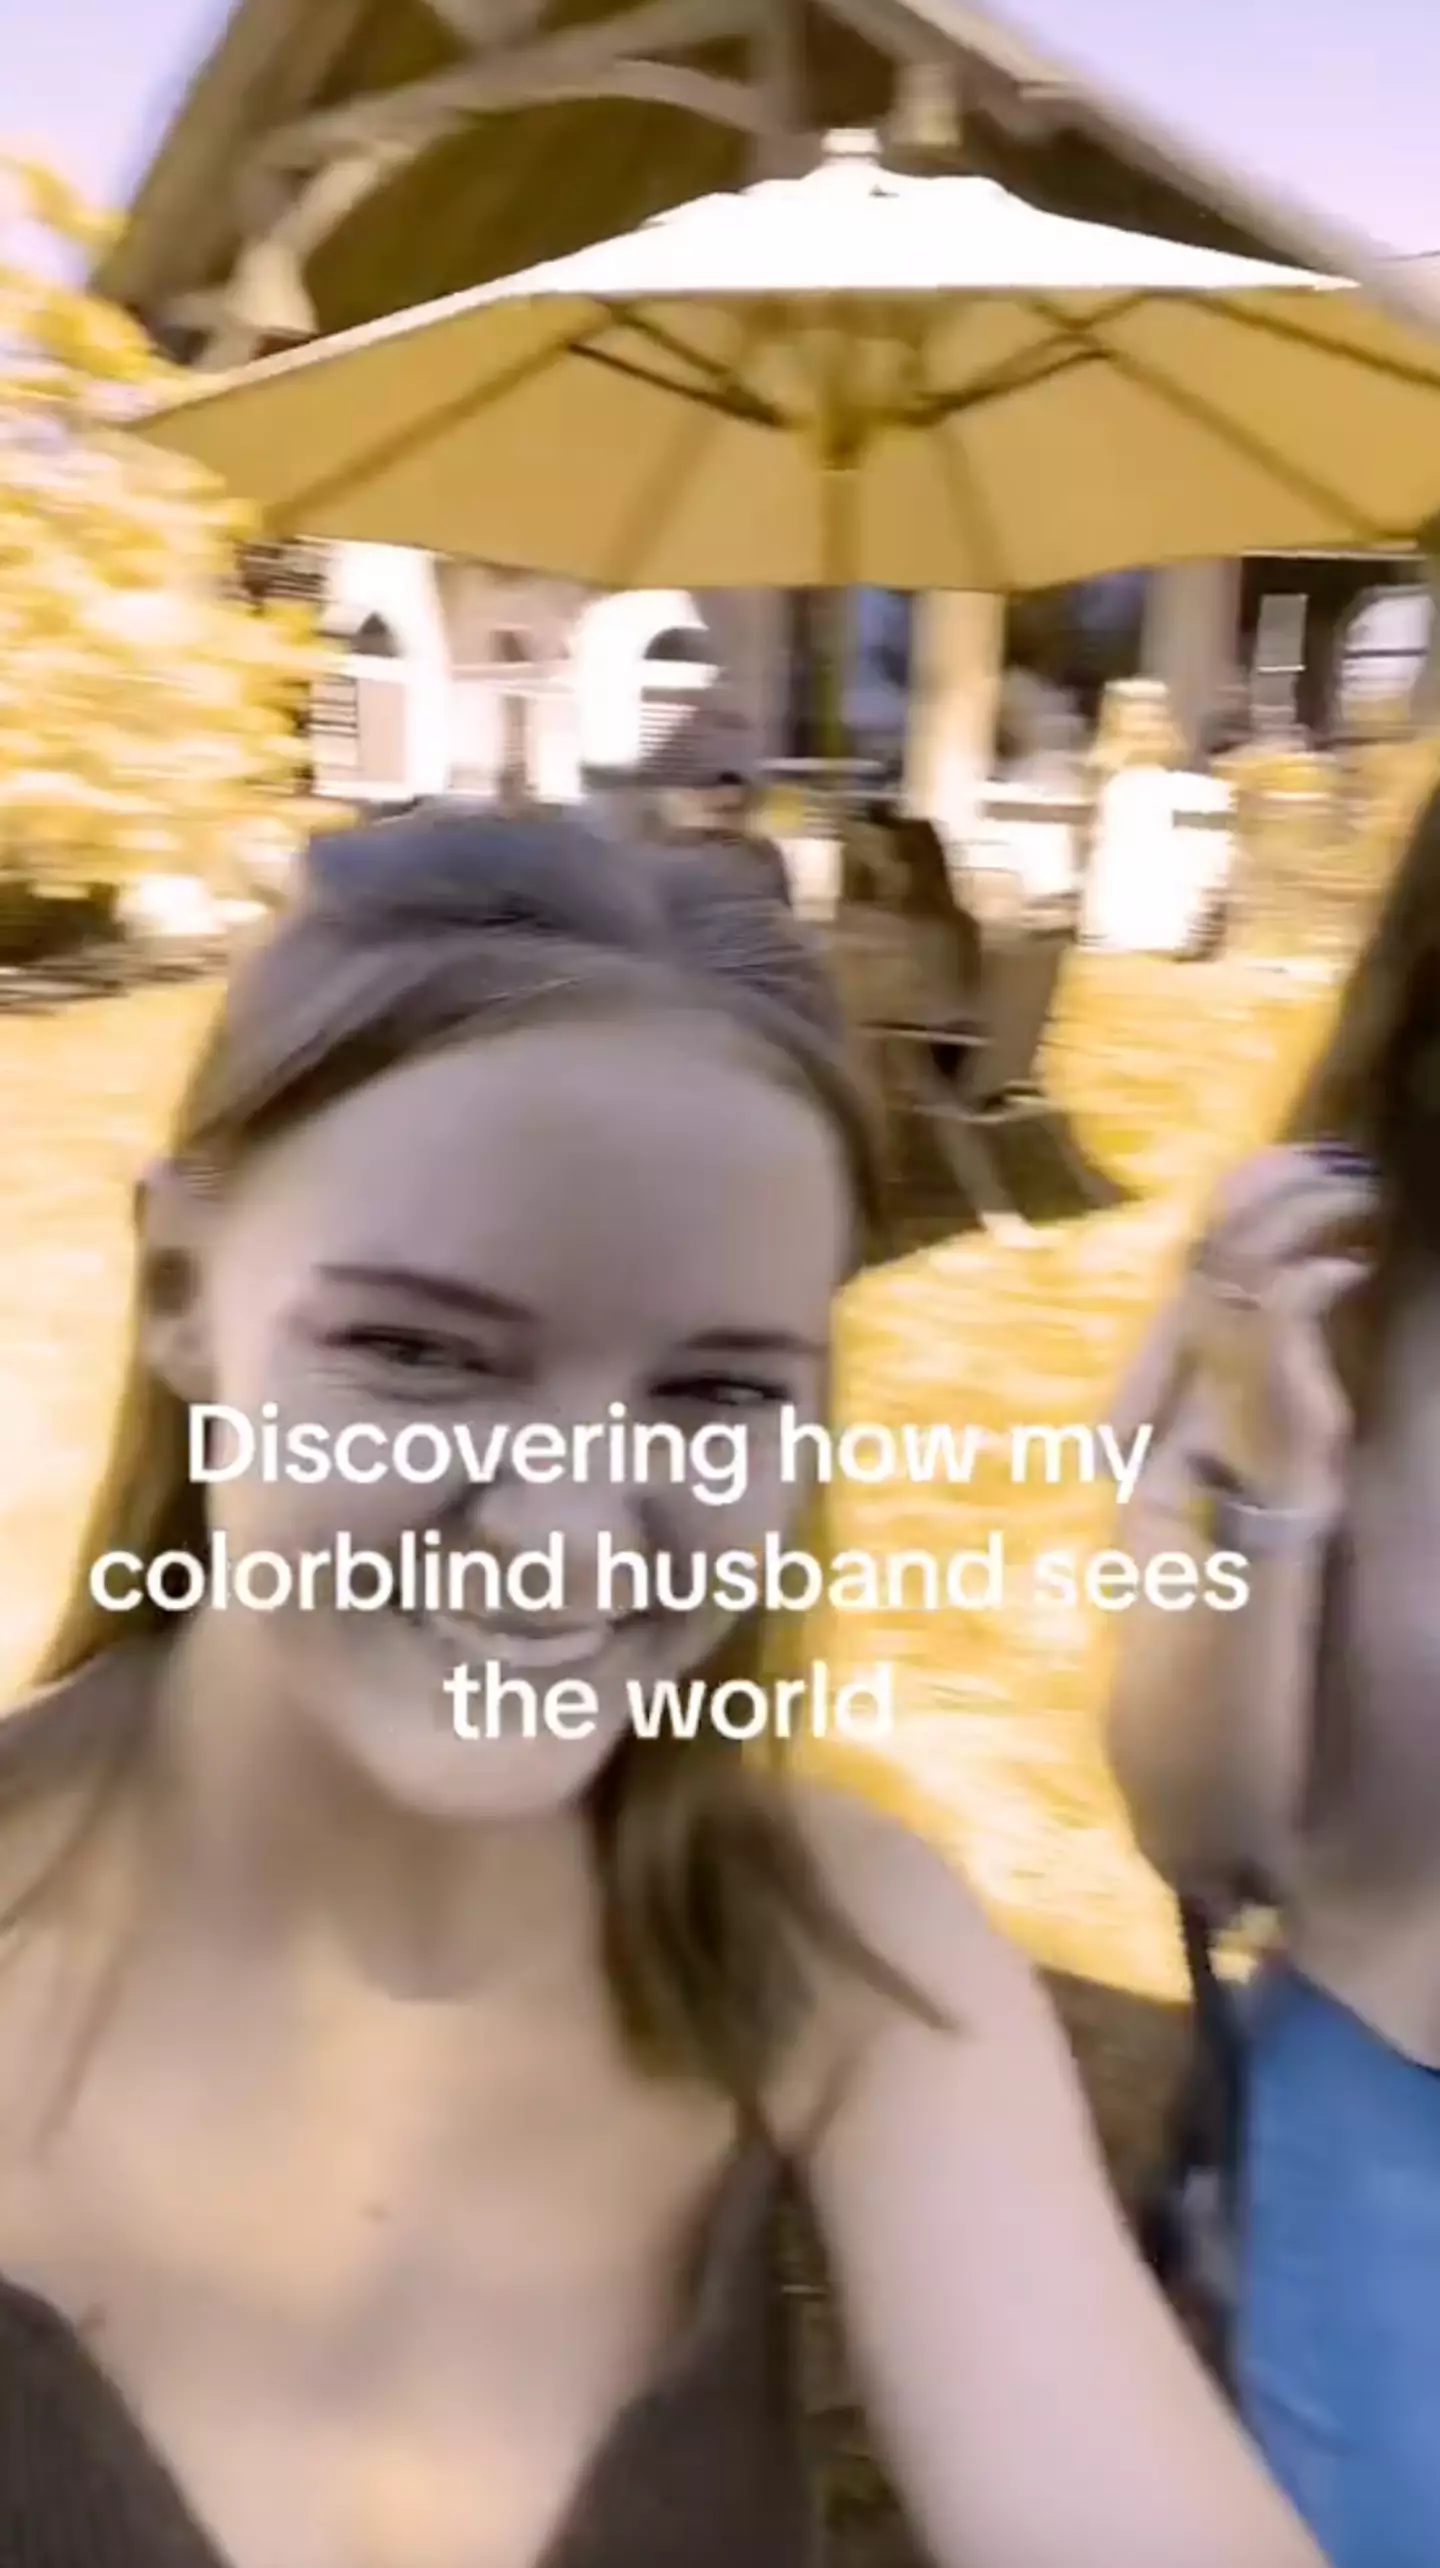 A TikTok clip shows how those with colour blindness see.